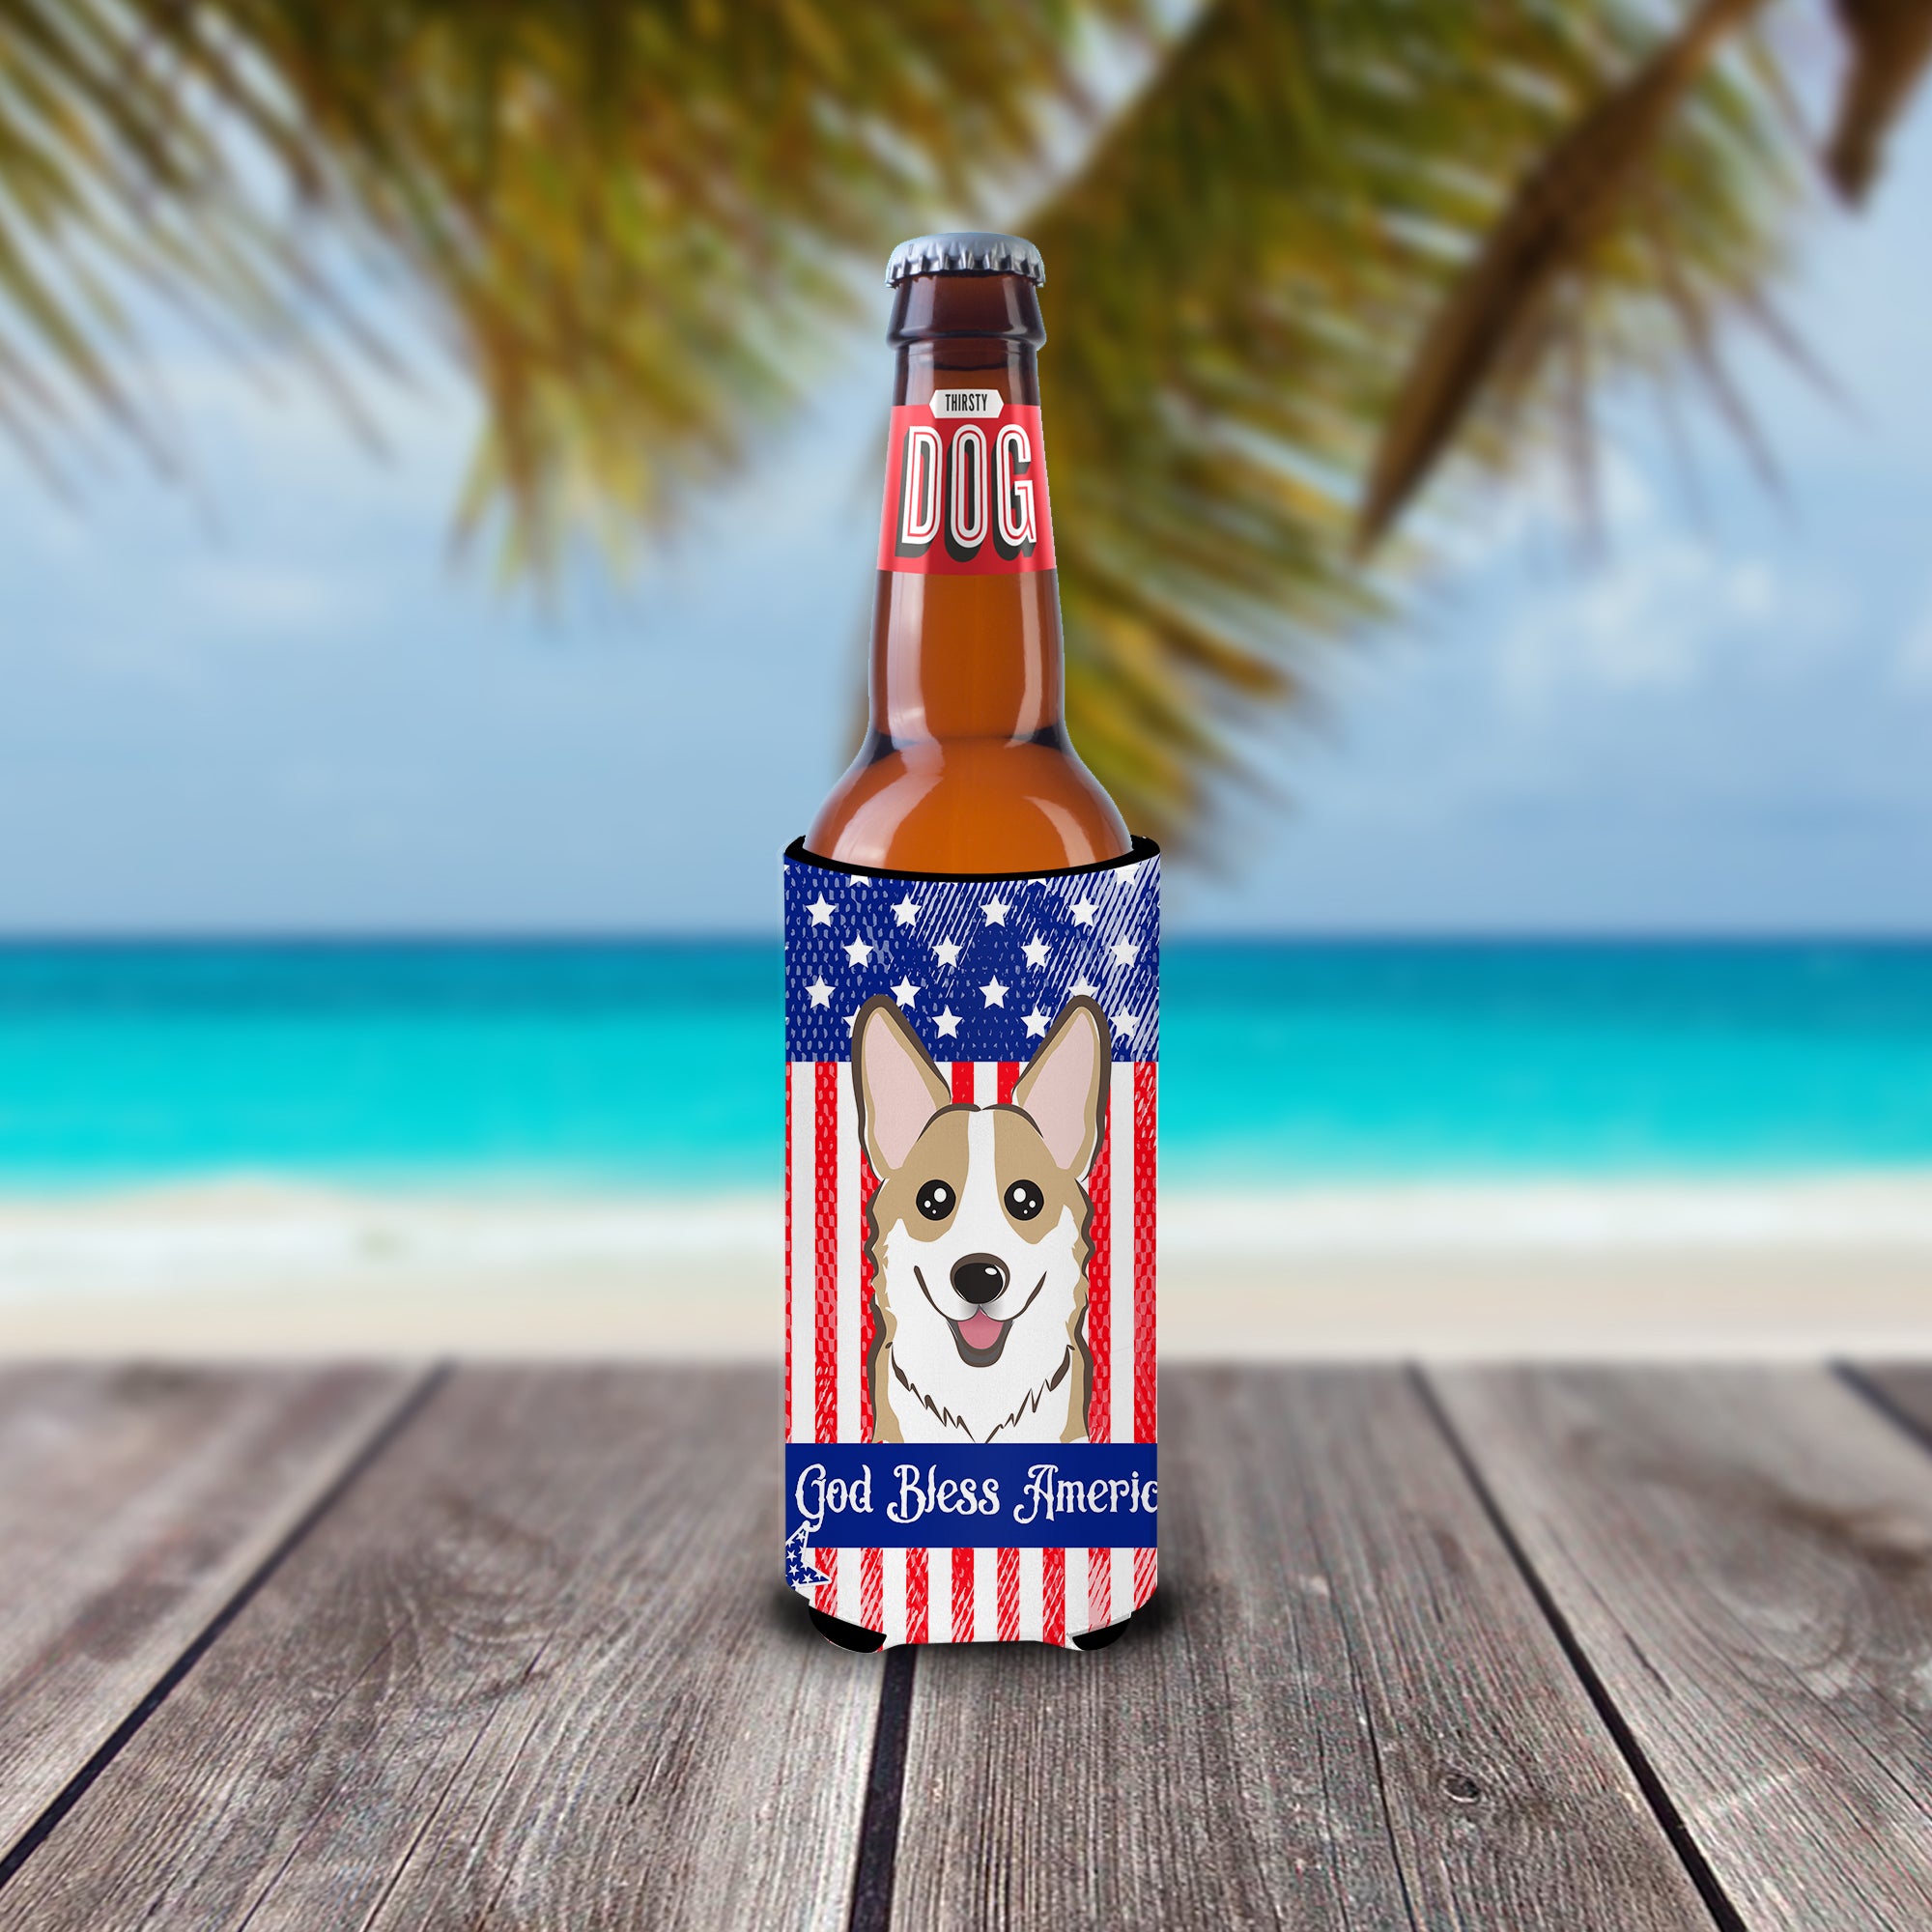 God Bless American Flag with Sable Corgi  Ultra Beverage Insulator for slim cans BB2183MUK